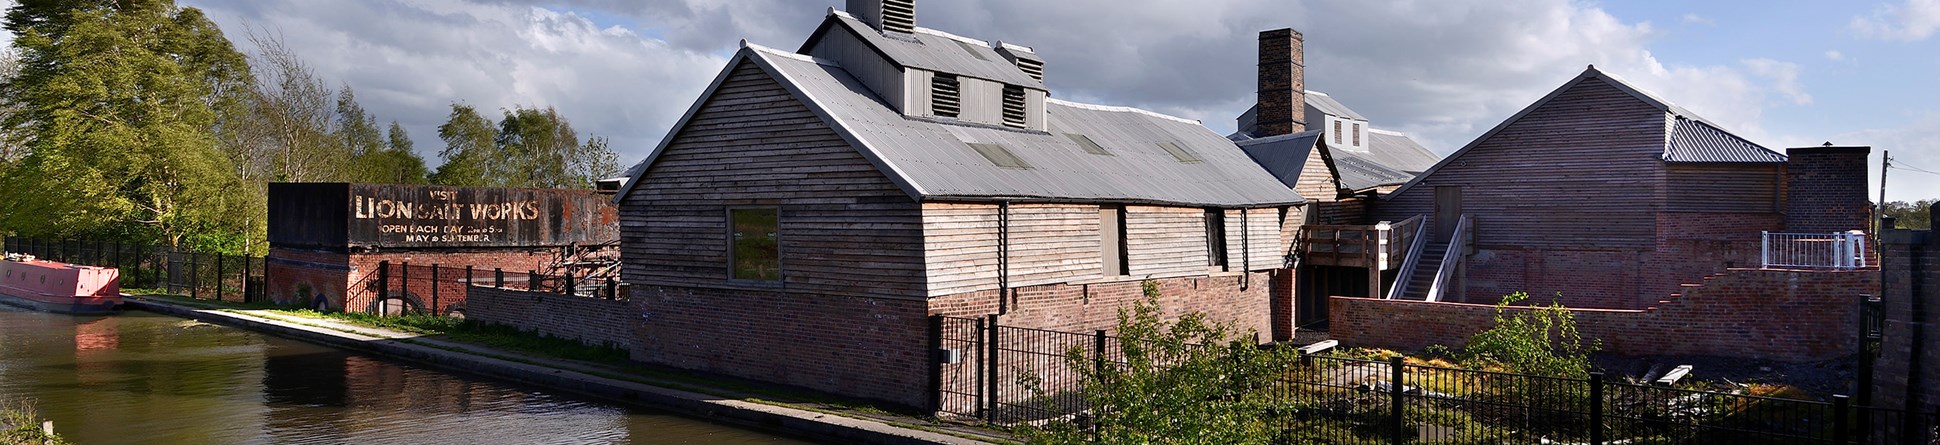 The Lion Salt Works in Marston, Cheshire, is a restored historic open-pan salt making site